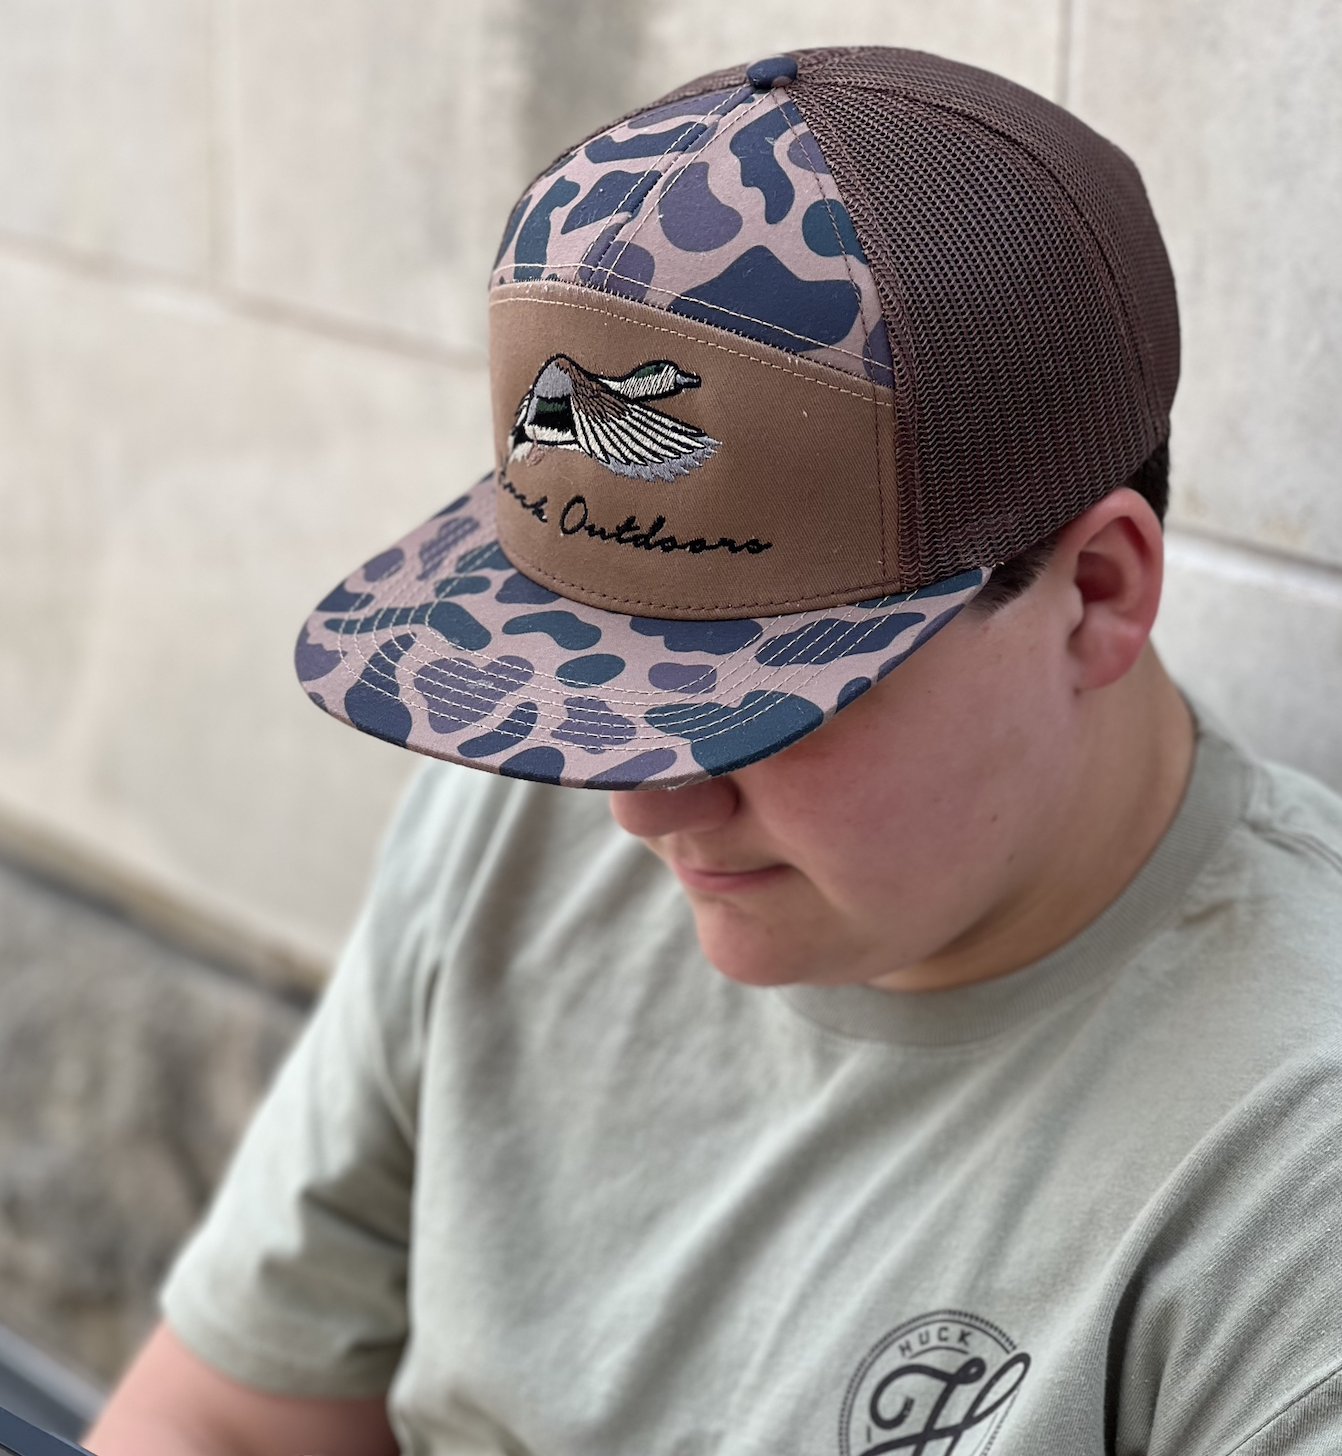 Rope Hats – Huck Outdoors